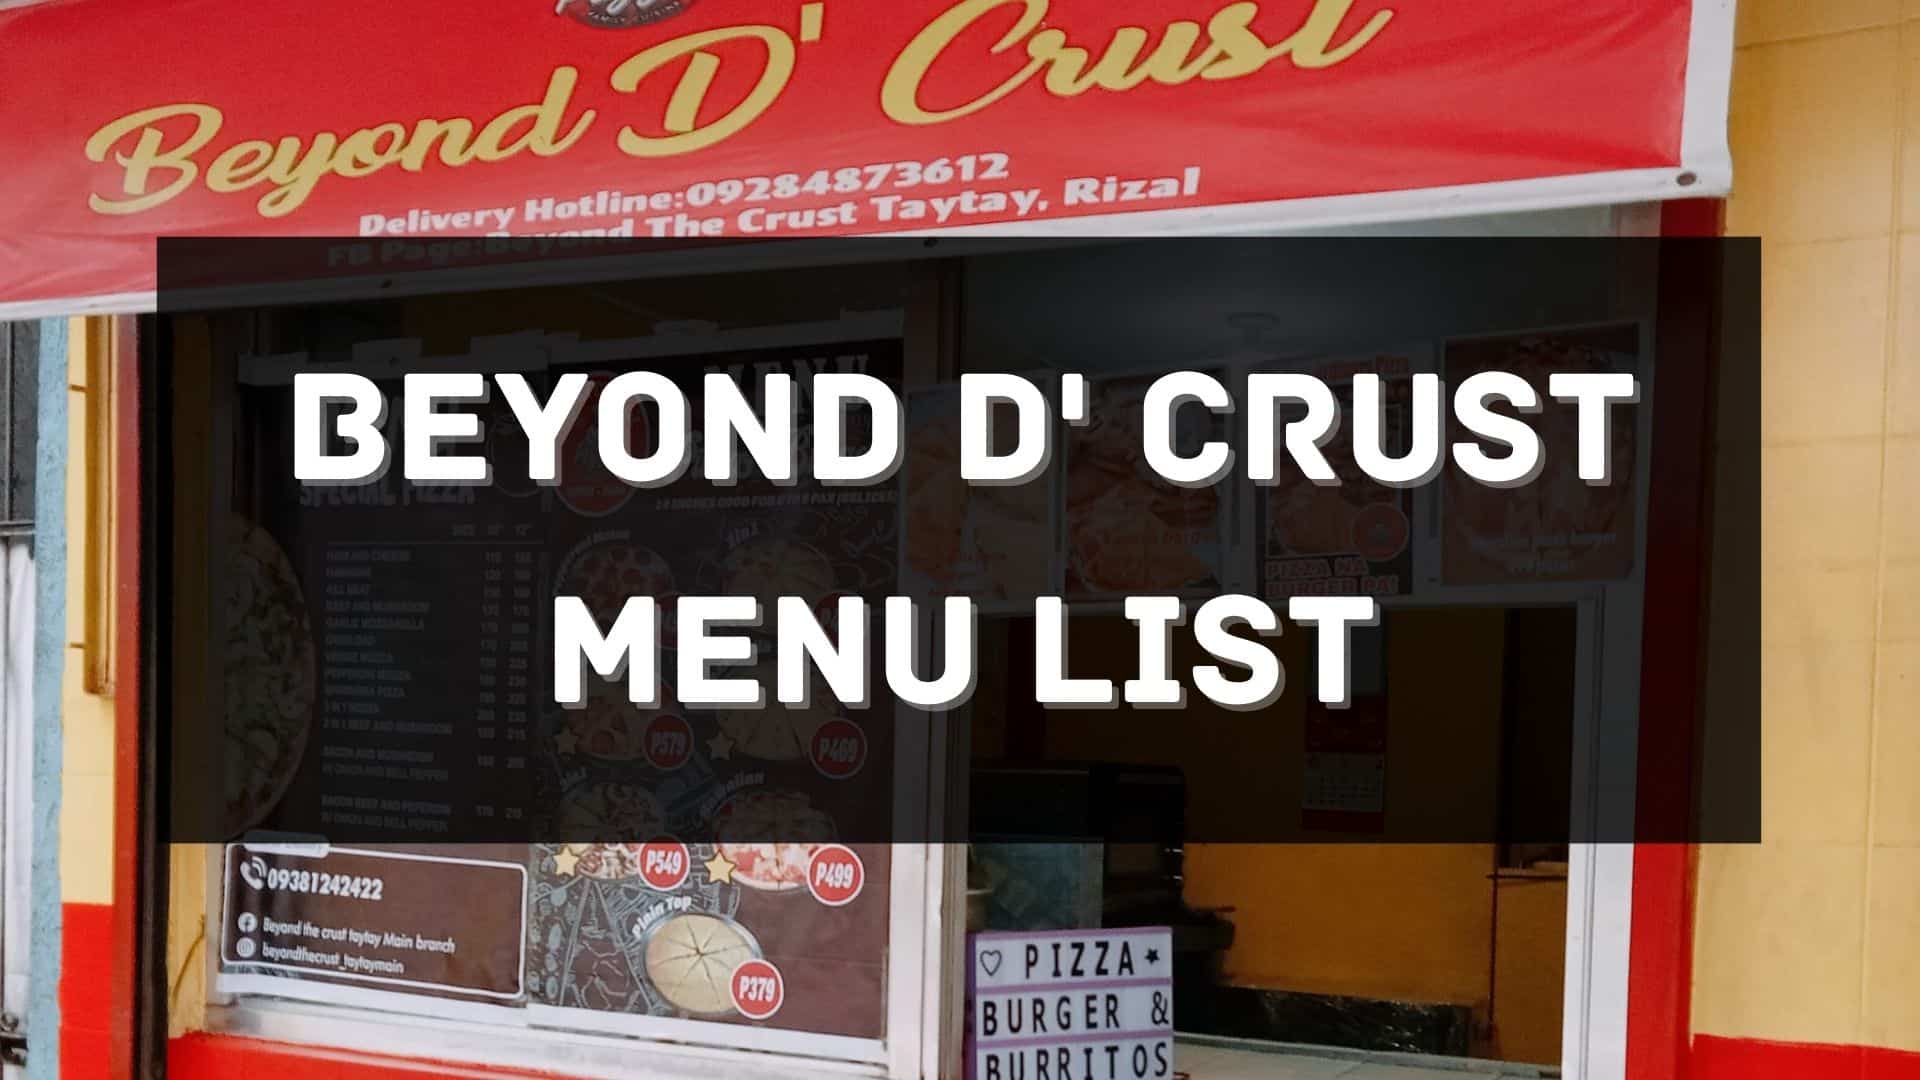 beyond the crust menu prices philippines